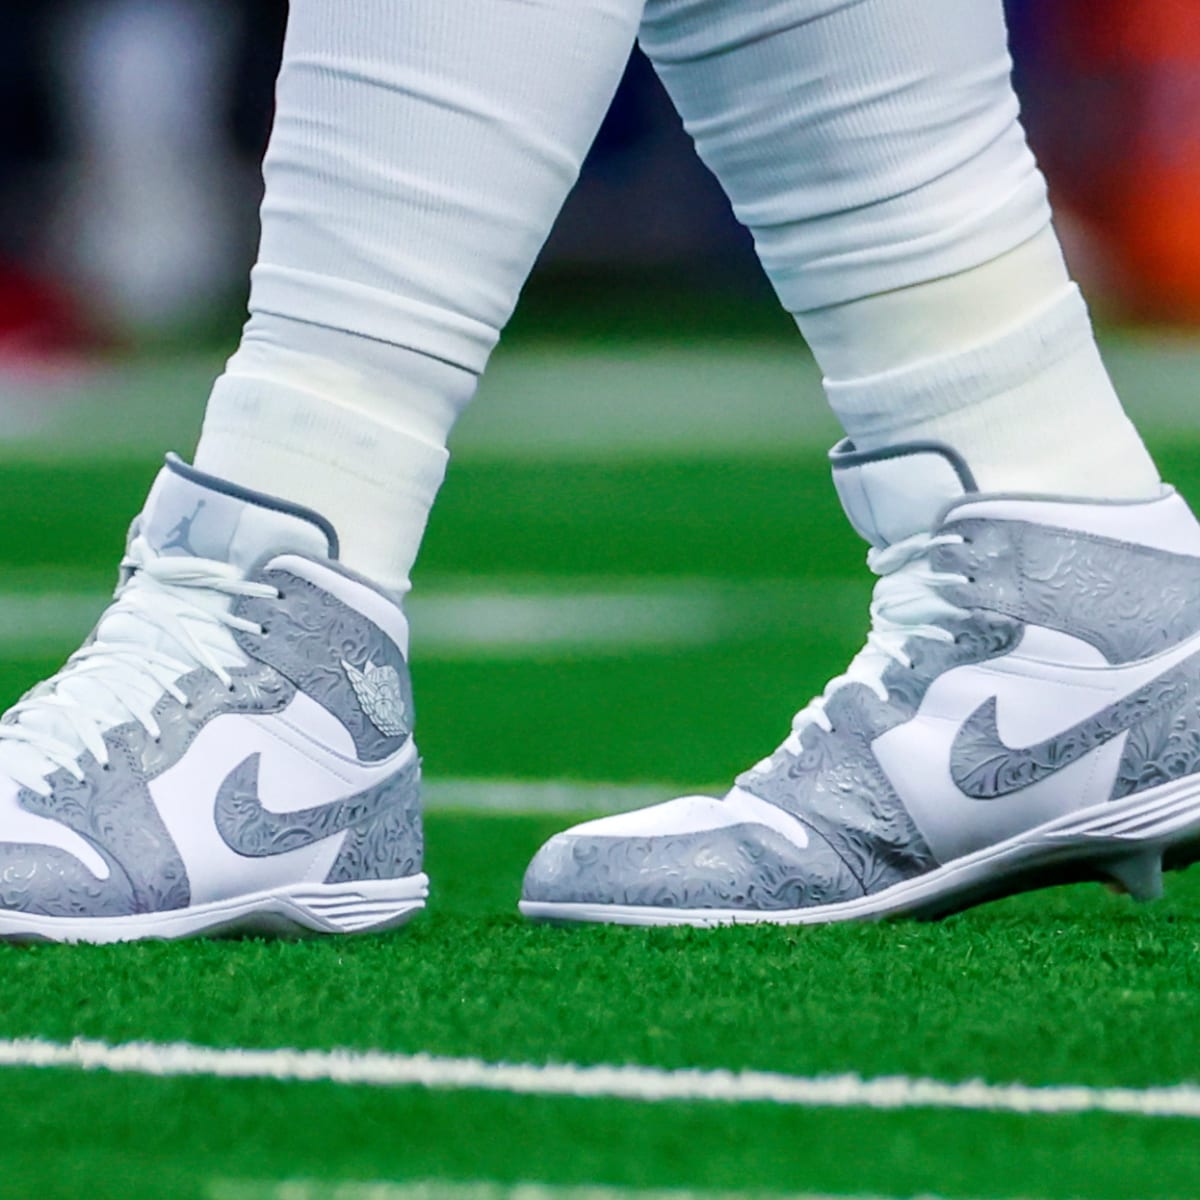 Football Cleats & Shoes.